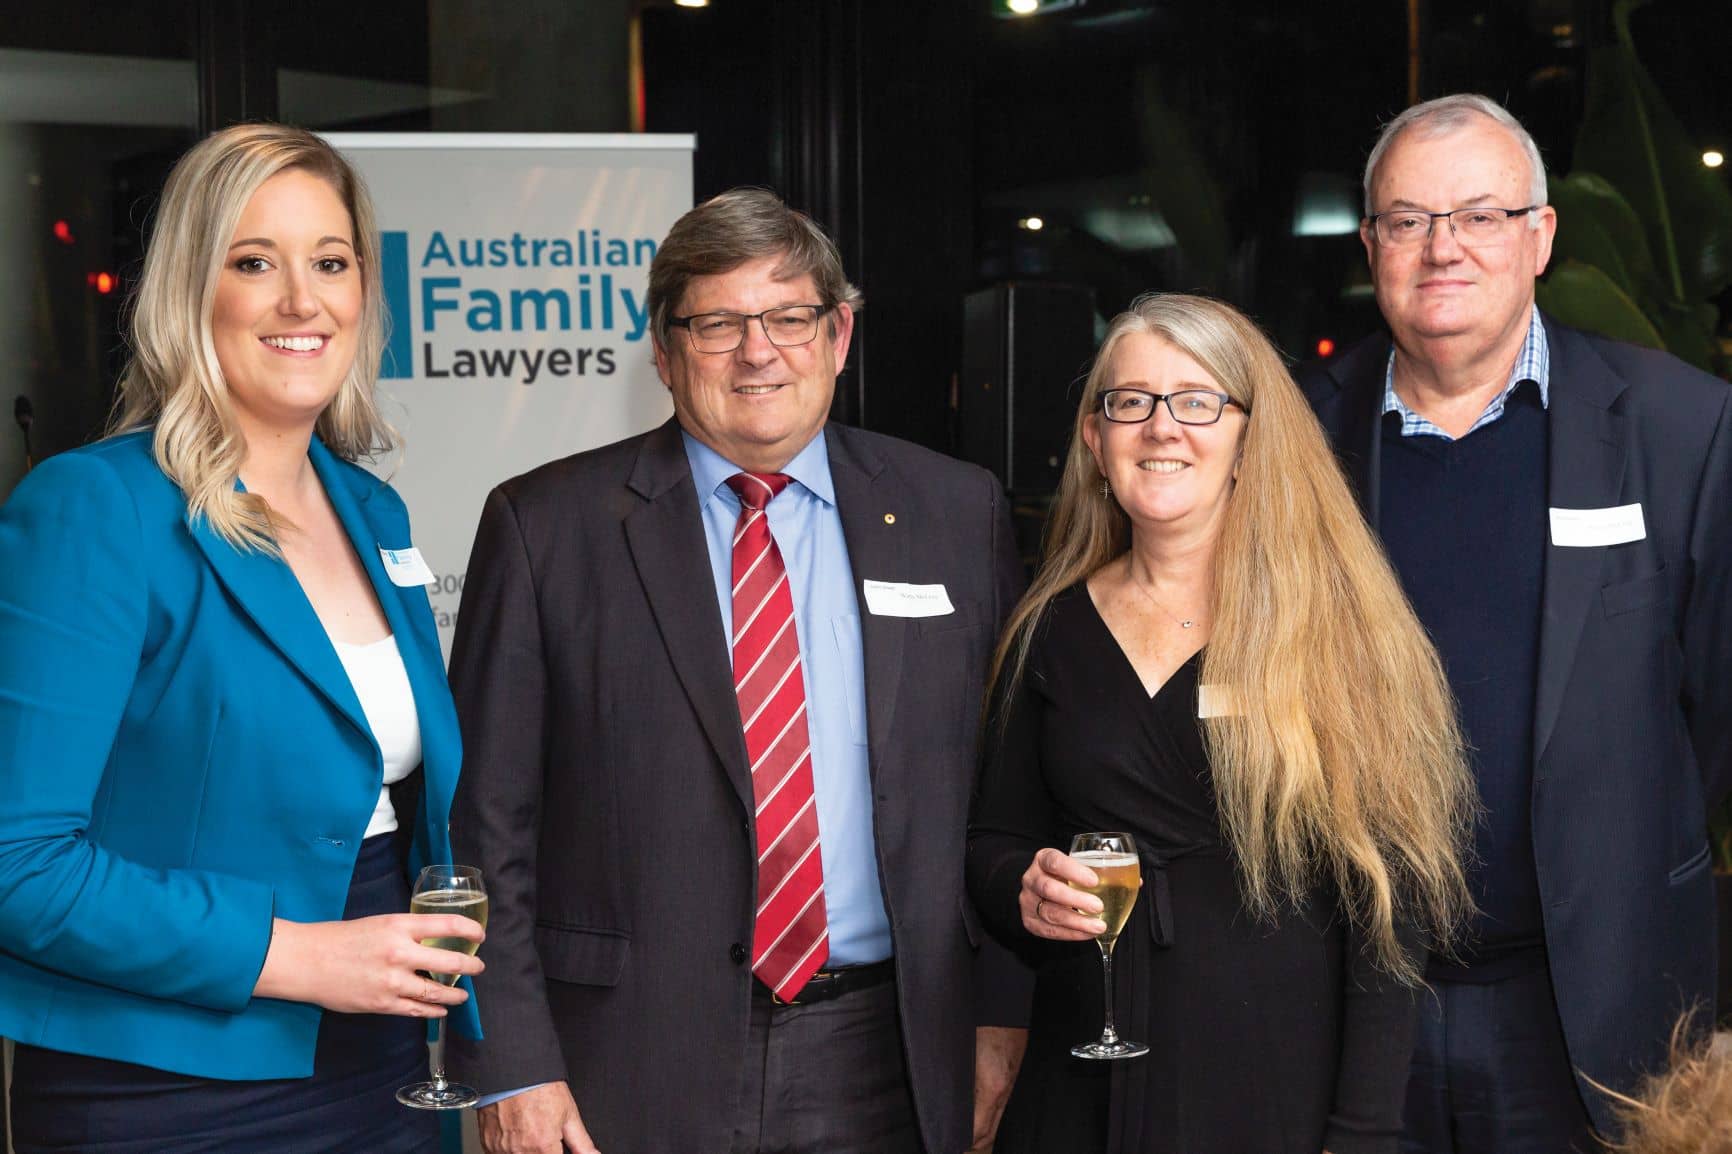 Australian Family Lawyers and Strong Law launch event | CW